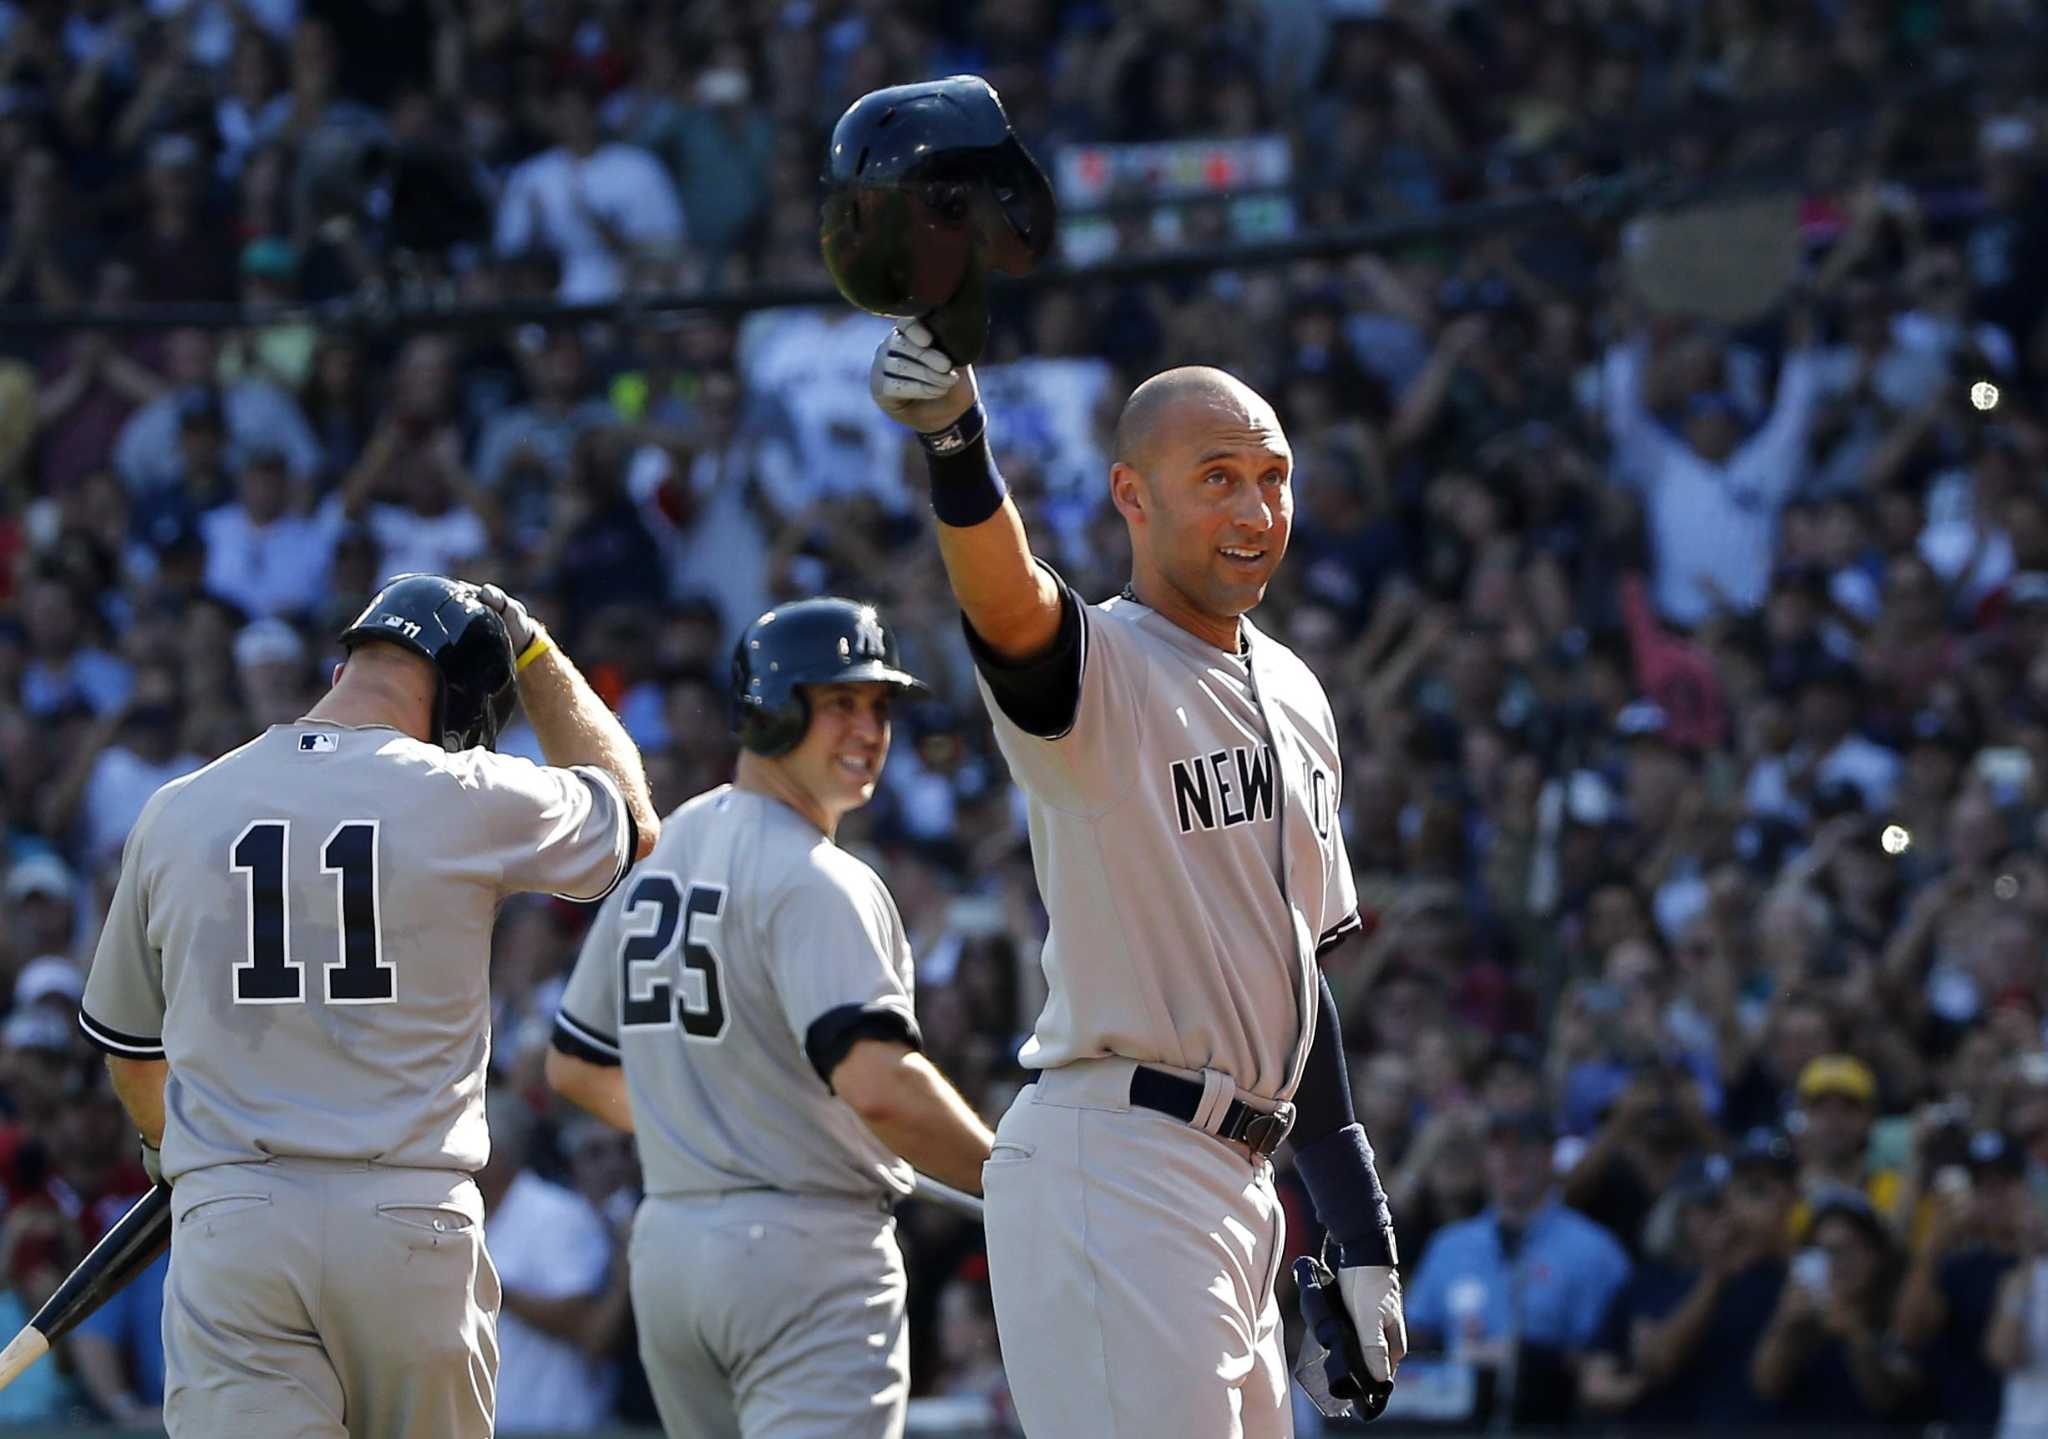 Why Manny Ramirez says Derek Jeter would have been 'just a regular